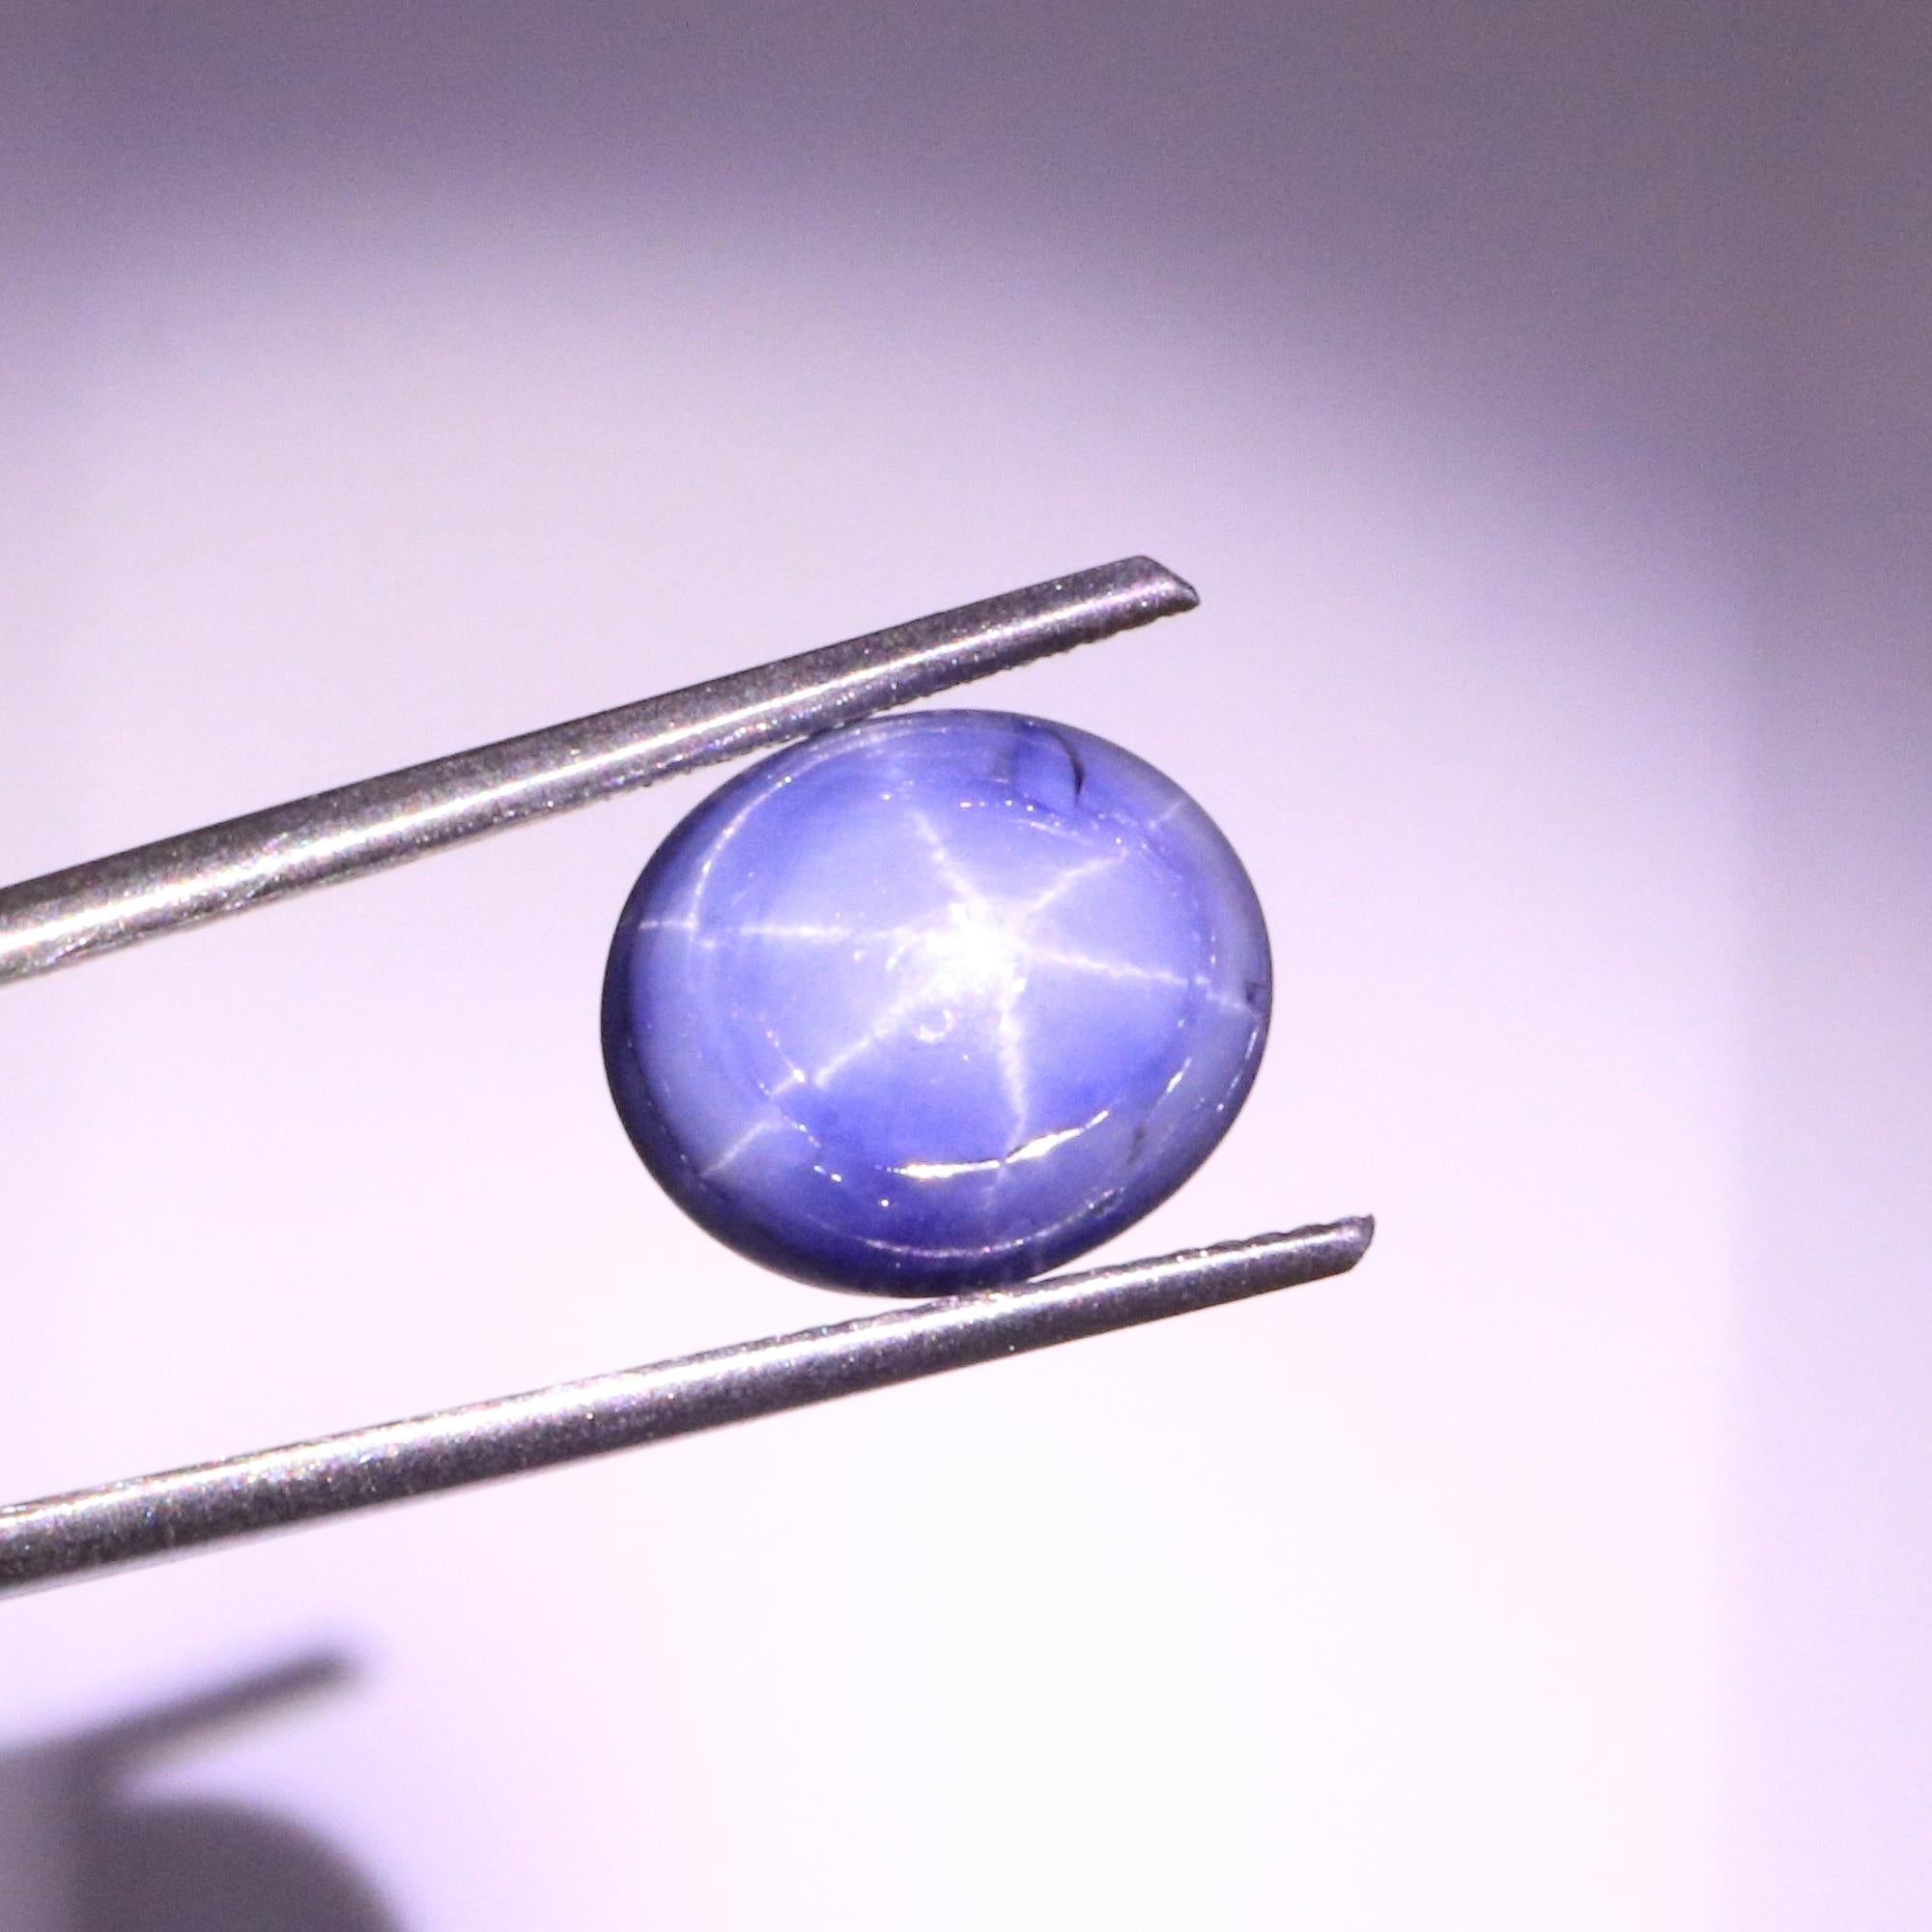 Star Sapphires are unique Sapphires that exhibit, under specific light, an effect called Asterism where a six rayed star is visible on on the top of the gem.
They are often within the inner part of a large Gem Quality Sapphire rough, which makes